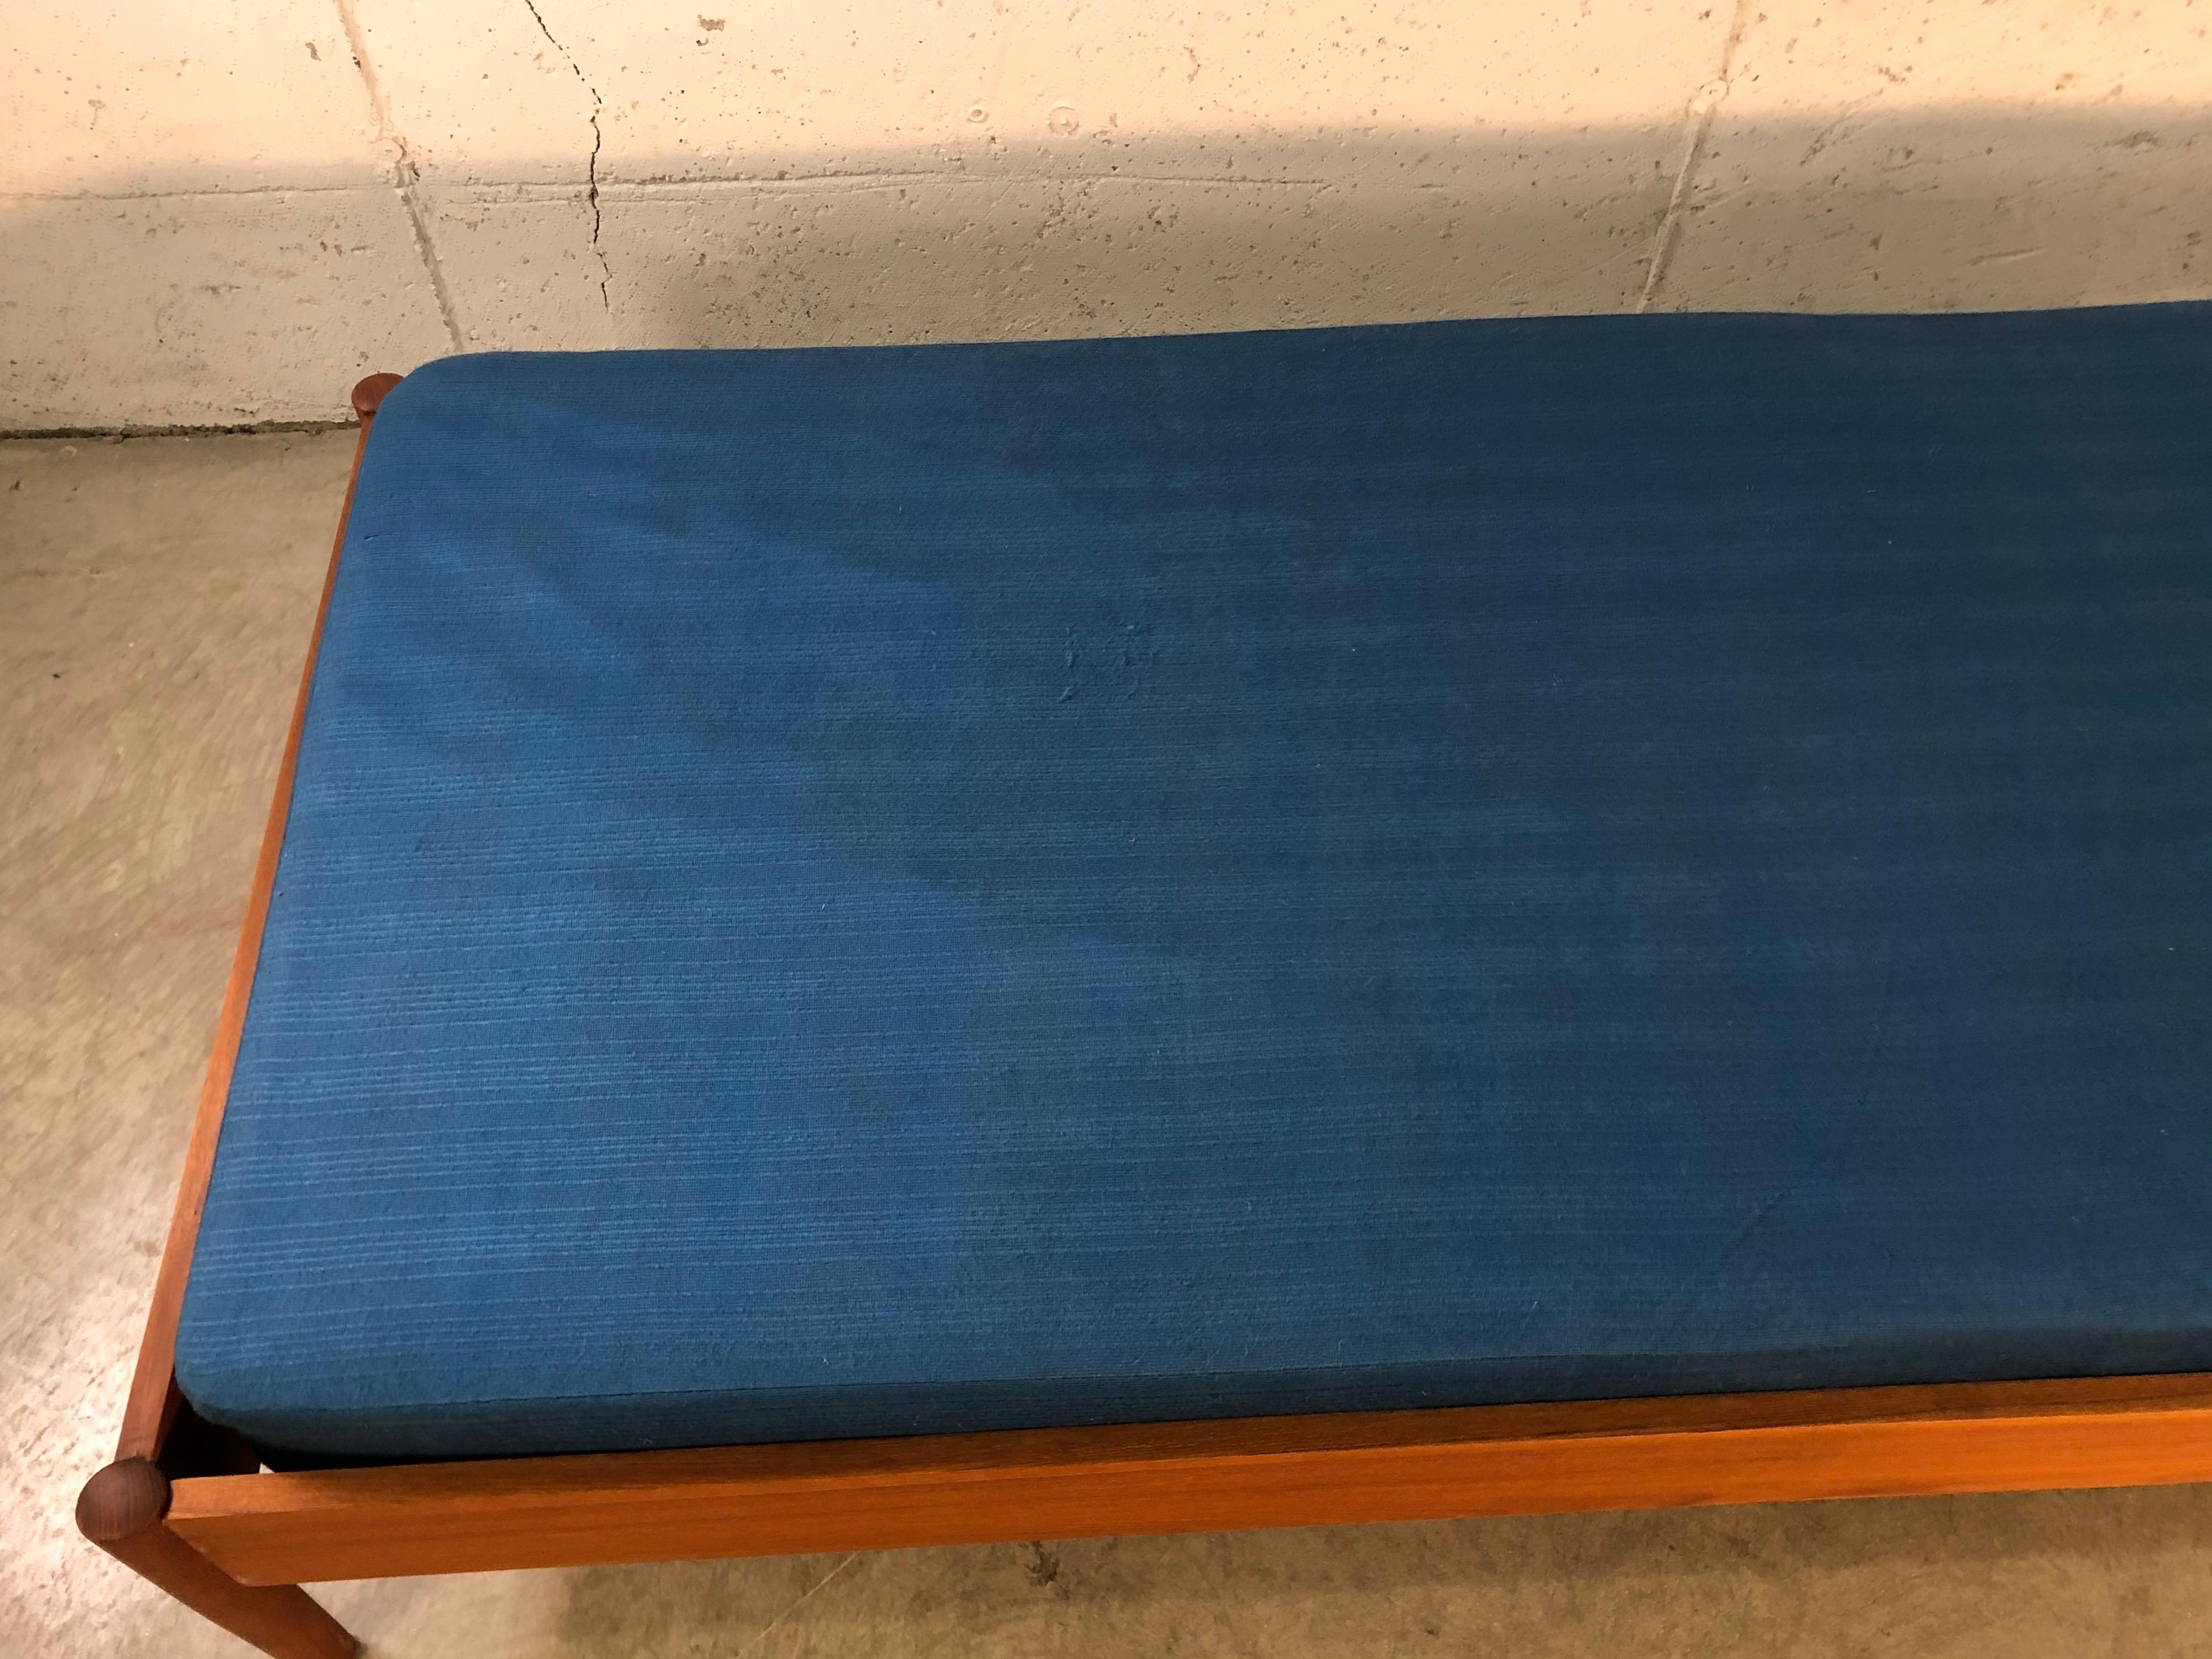 Dyrlund Teak Danish Daybed In Good Condition For Sale In Amherst, NH